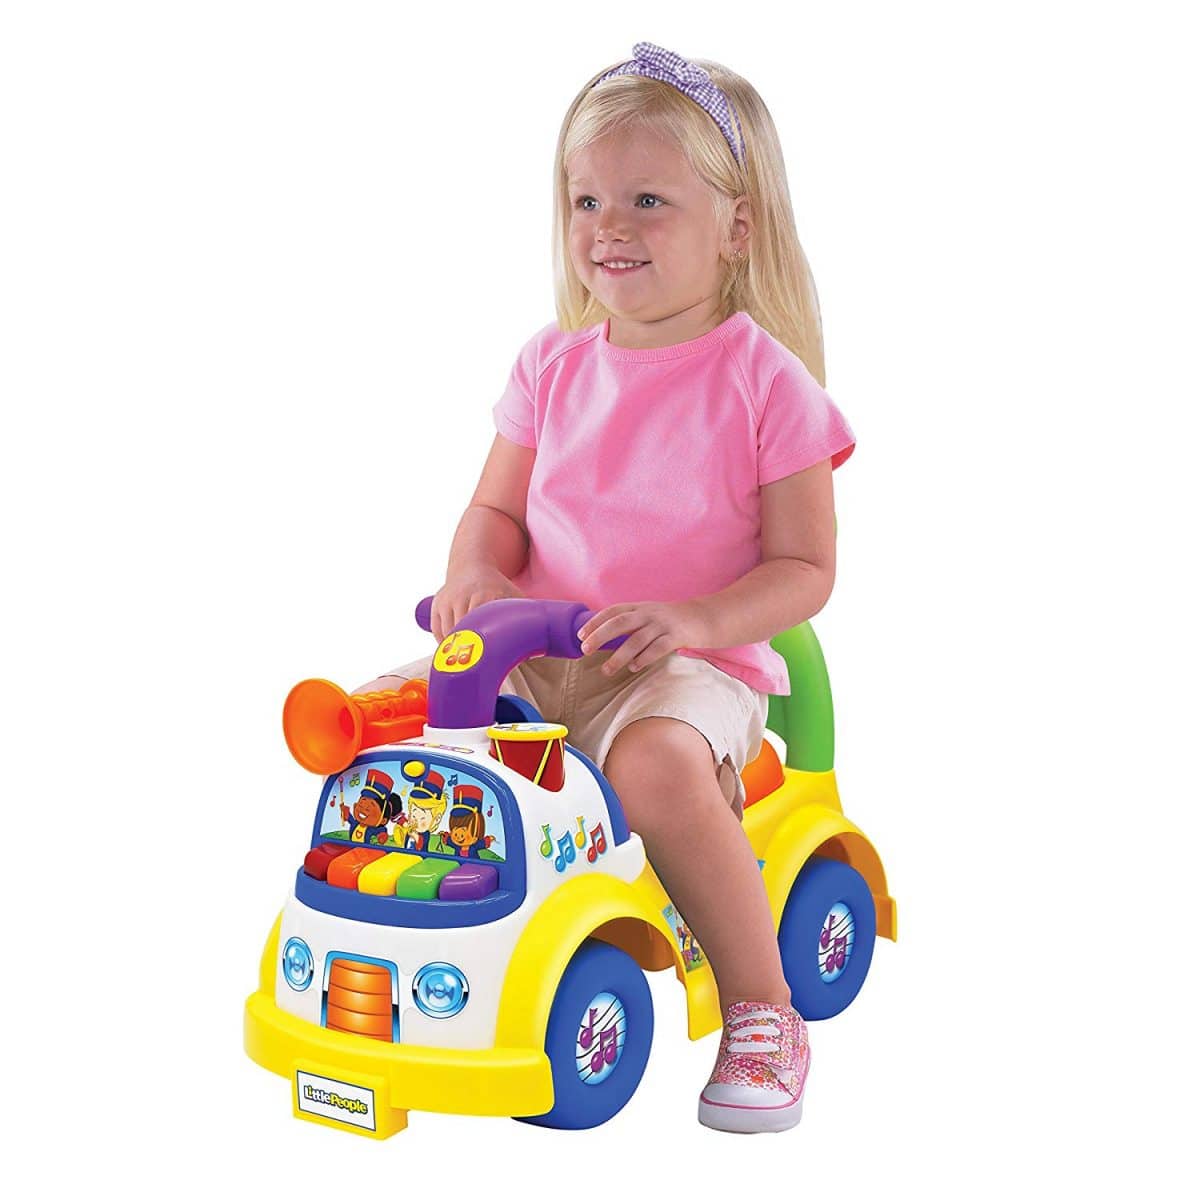 ride on and push along toys